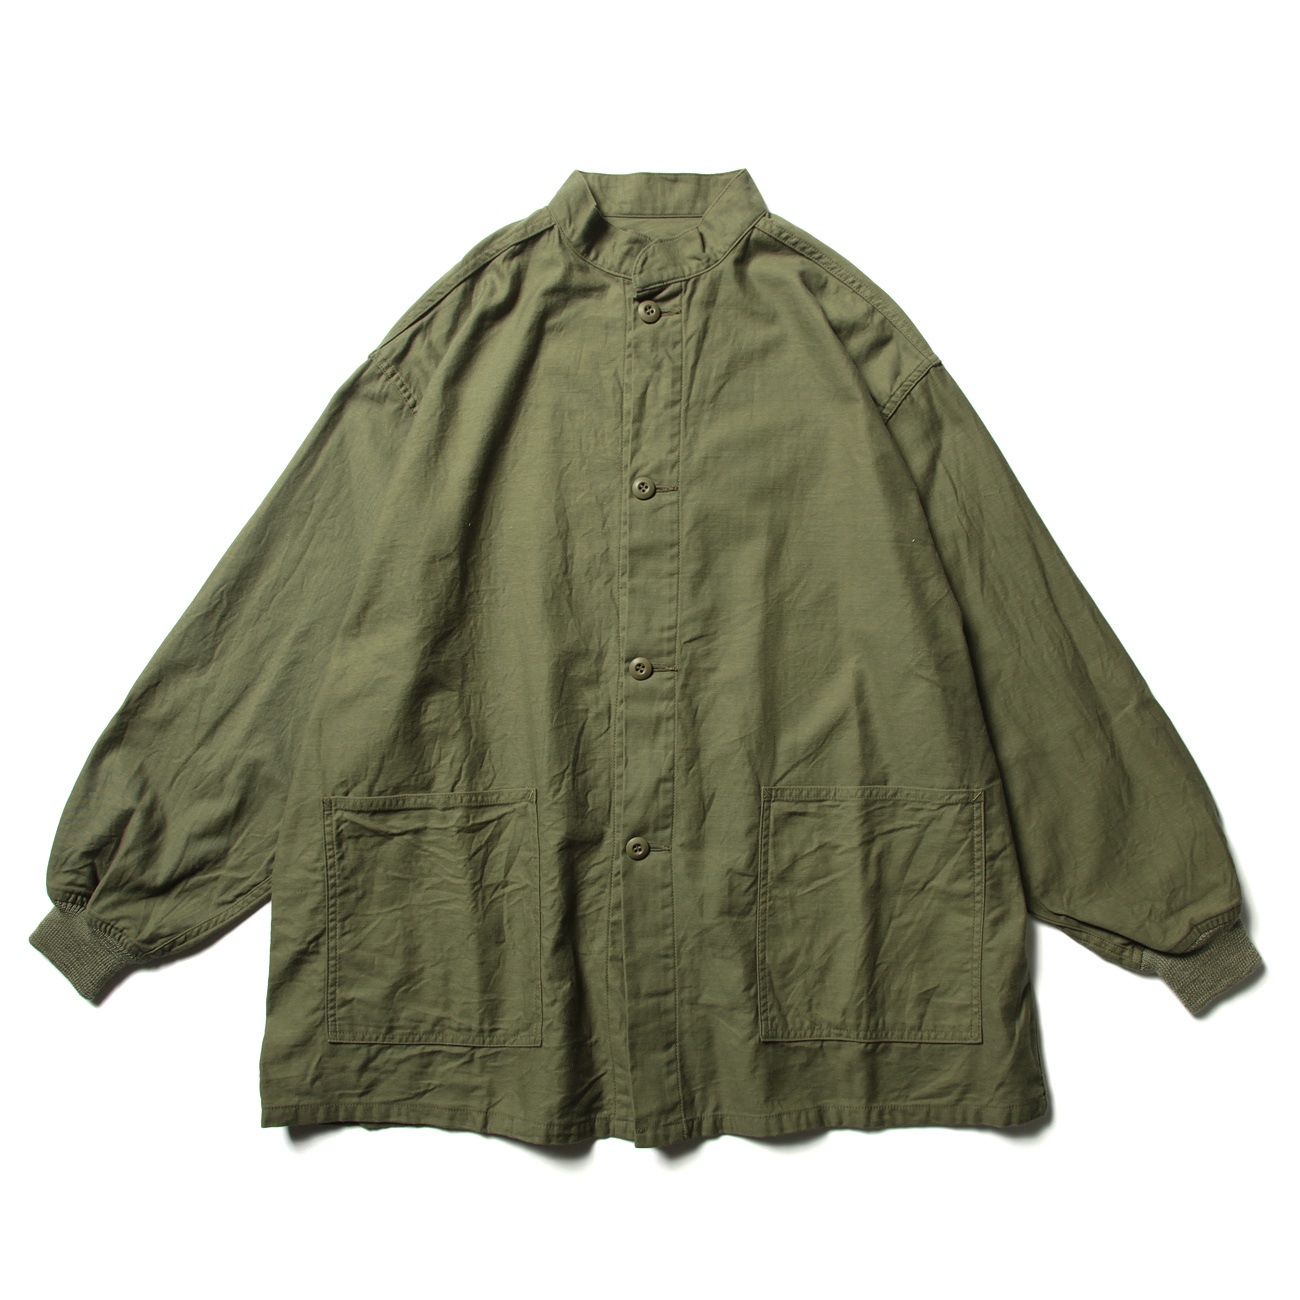 S.C. Army Shirt - Back Sateen - Olive